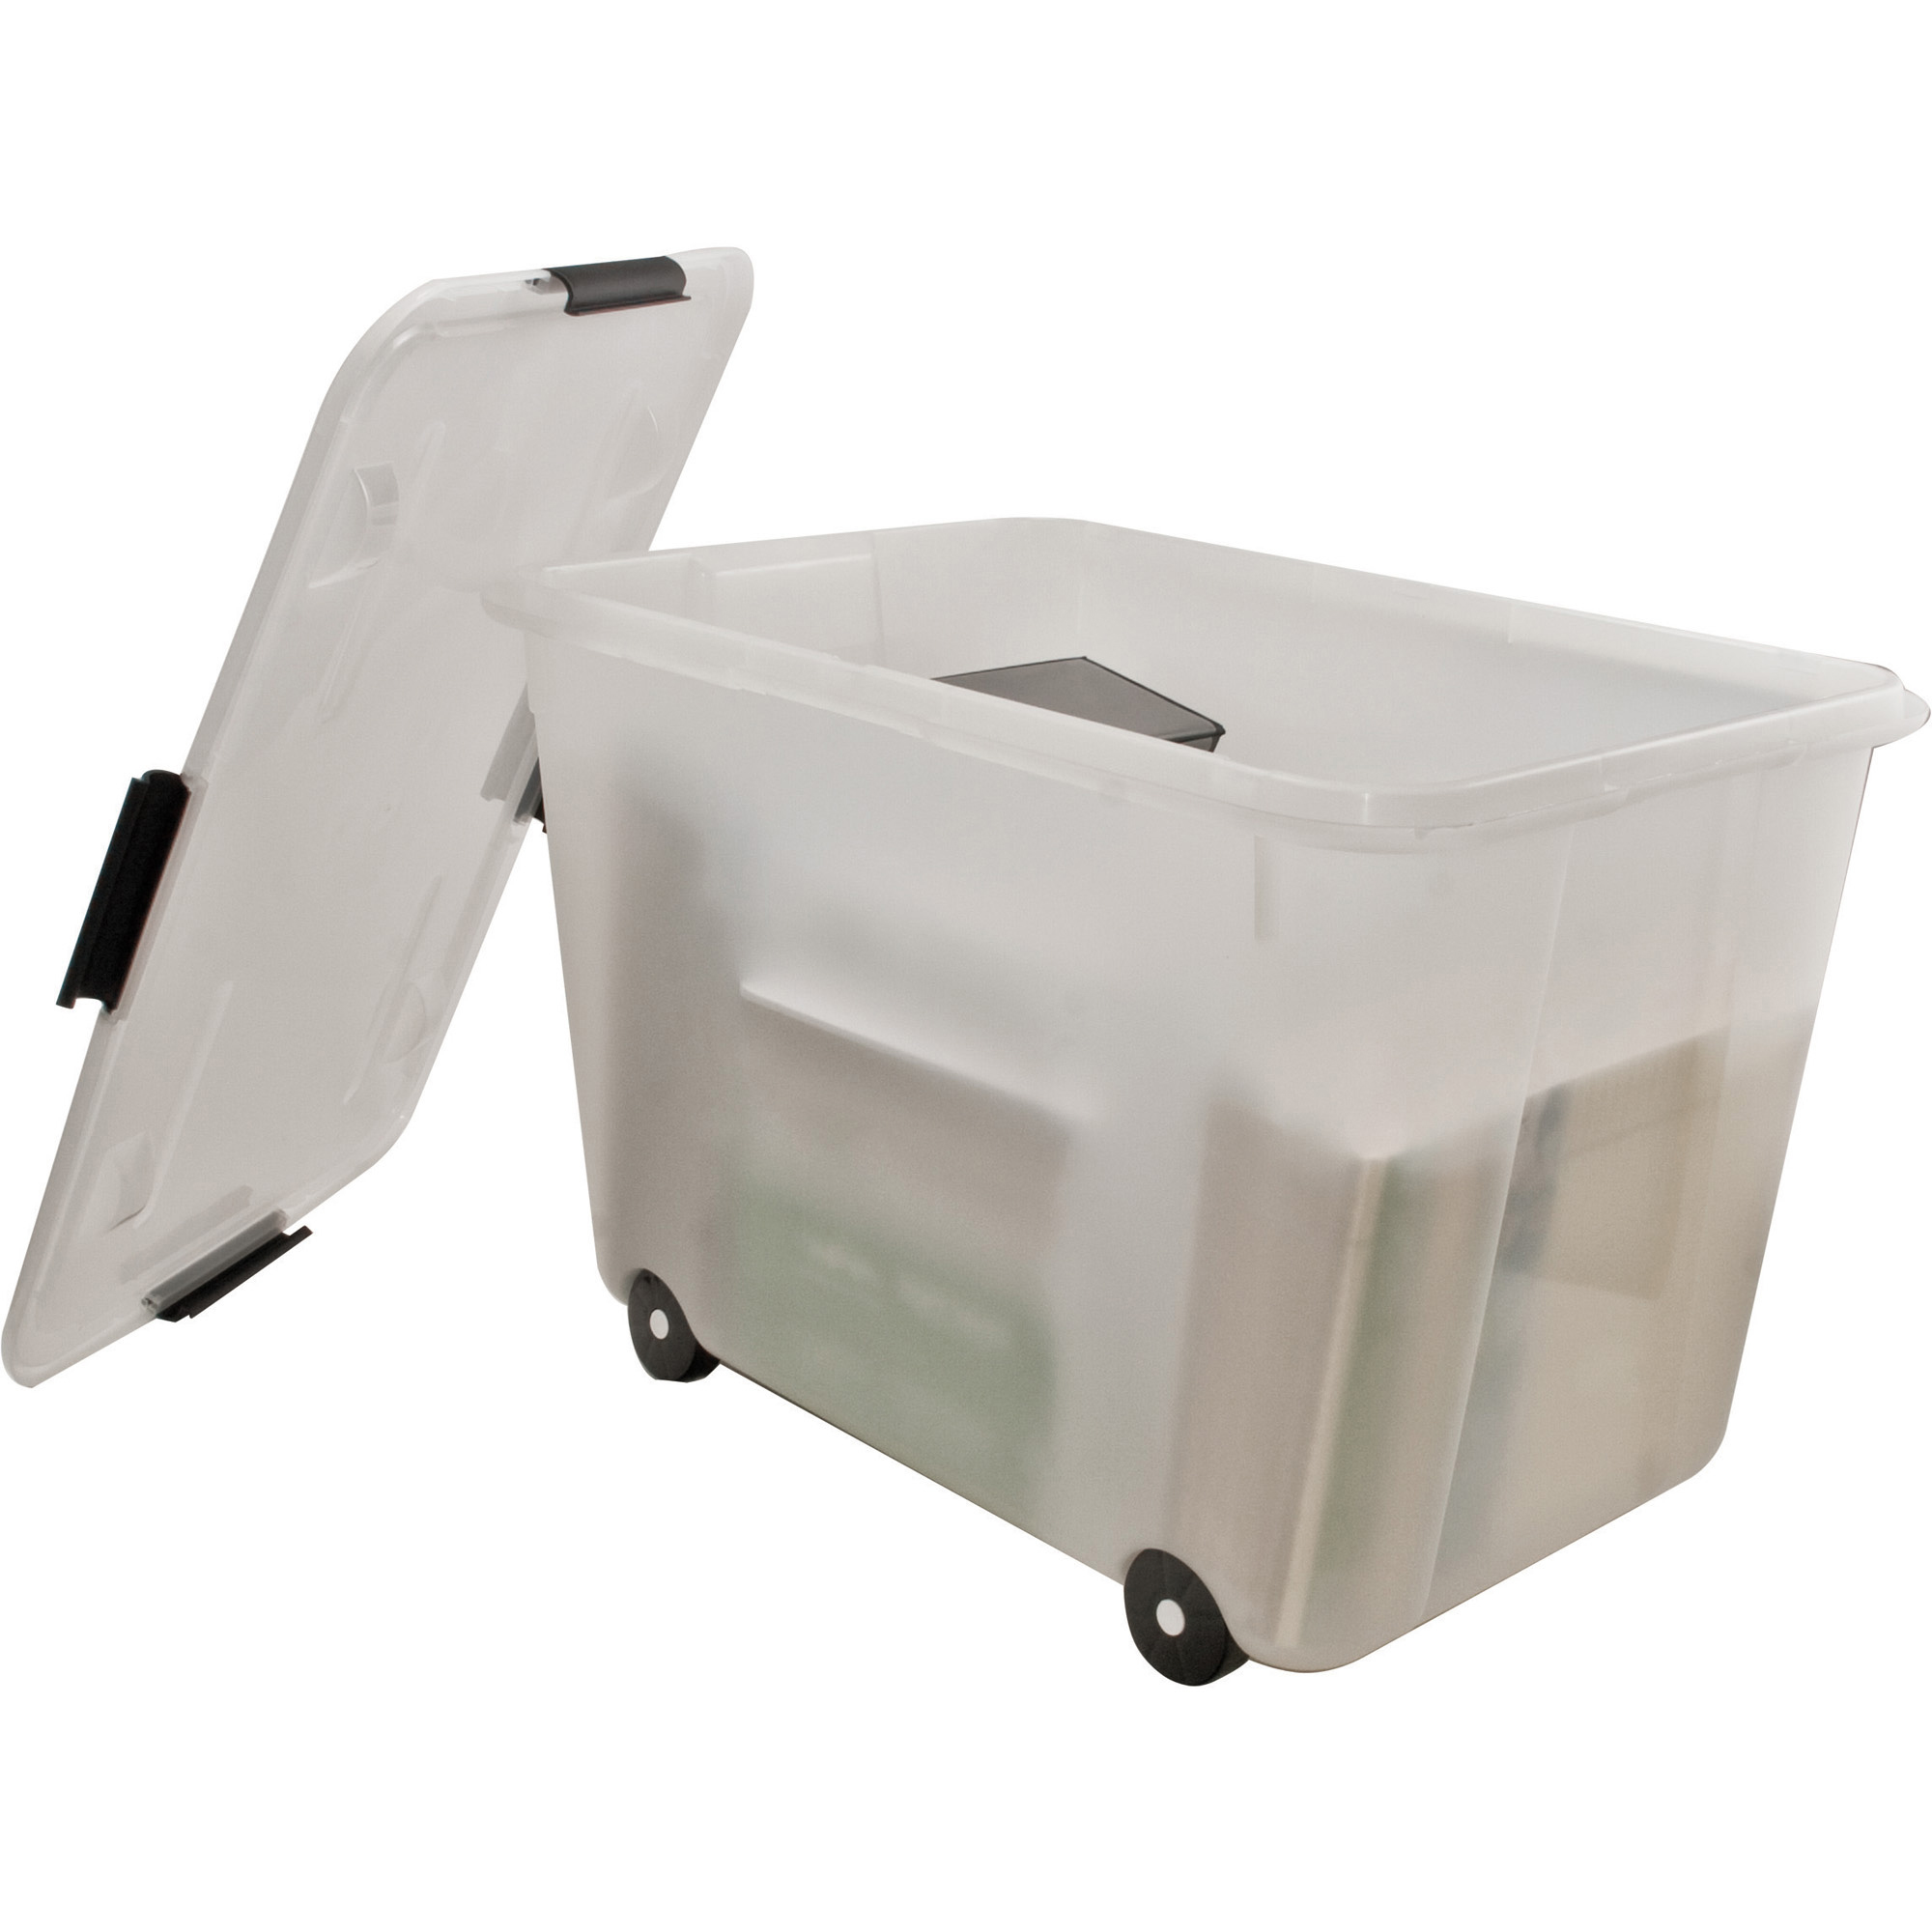 Knowledge Tree  Advantus Corp. Advantus 15-gallon Rolling Storage Tub -  External Dimensions: 23.8 Width x 15.8 Depth x 15.8 Height - 15 gal -  Stackable - Plastic - Clear - For Document - 1 Each